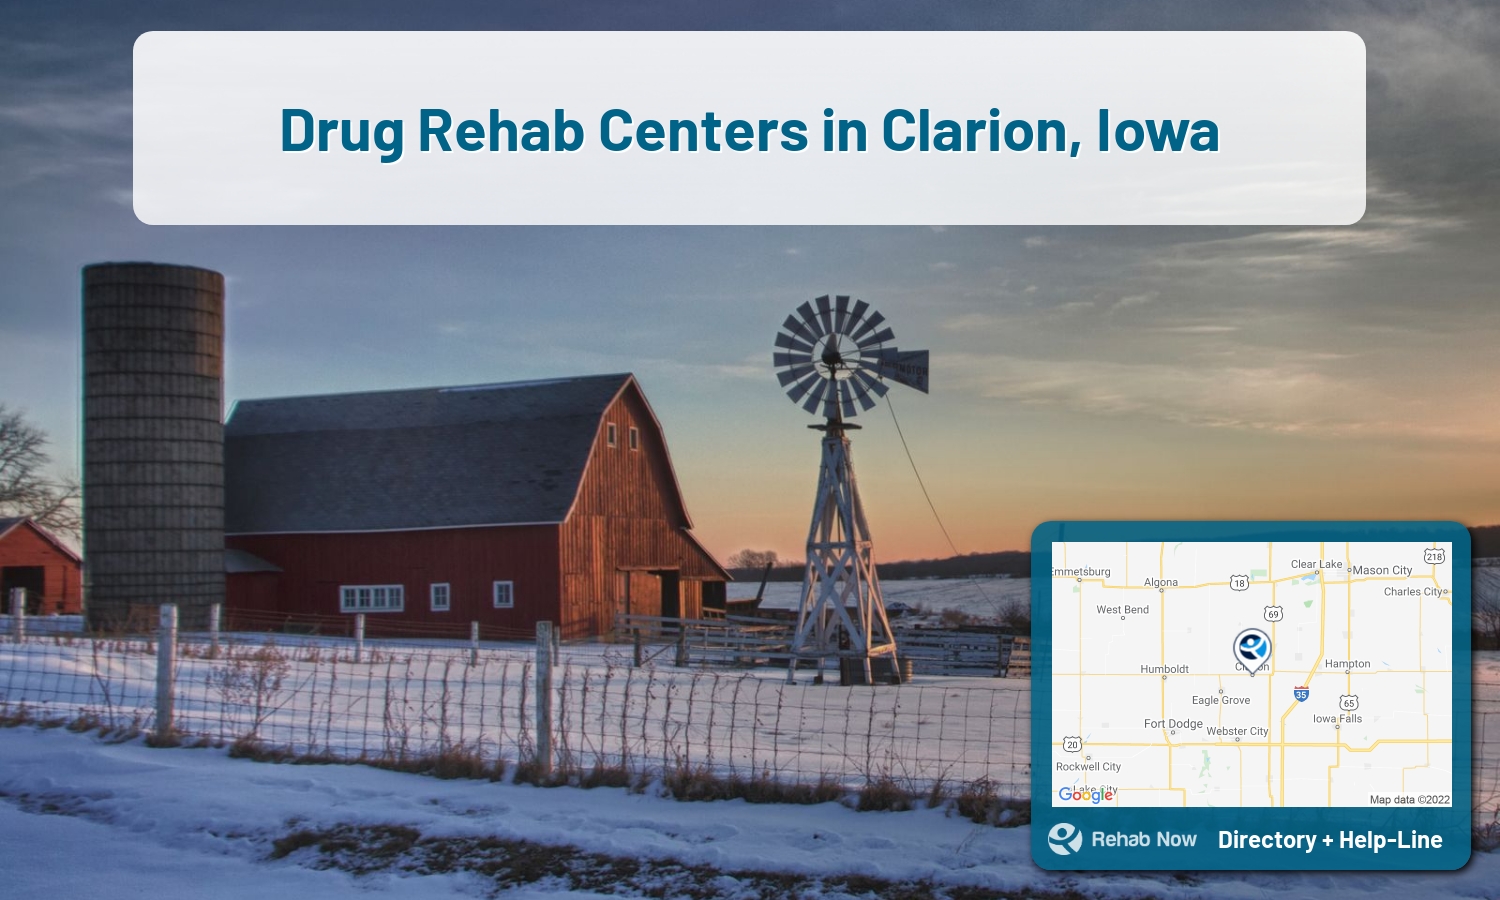 List of alcohol and drug treatment centers near you in Clarion, Iowa. Research certifications, programs, methods, pricing, and more.